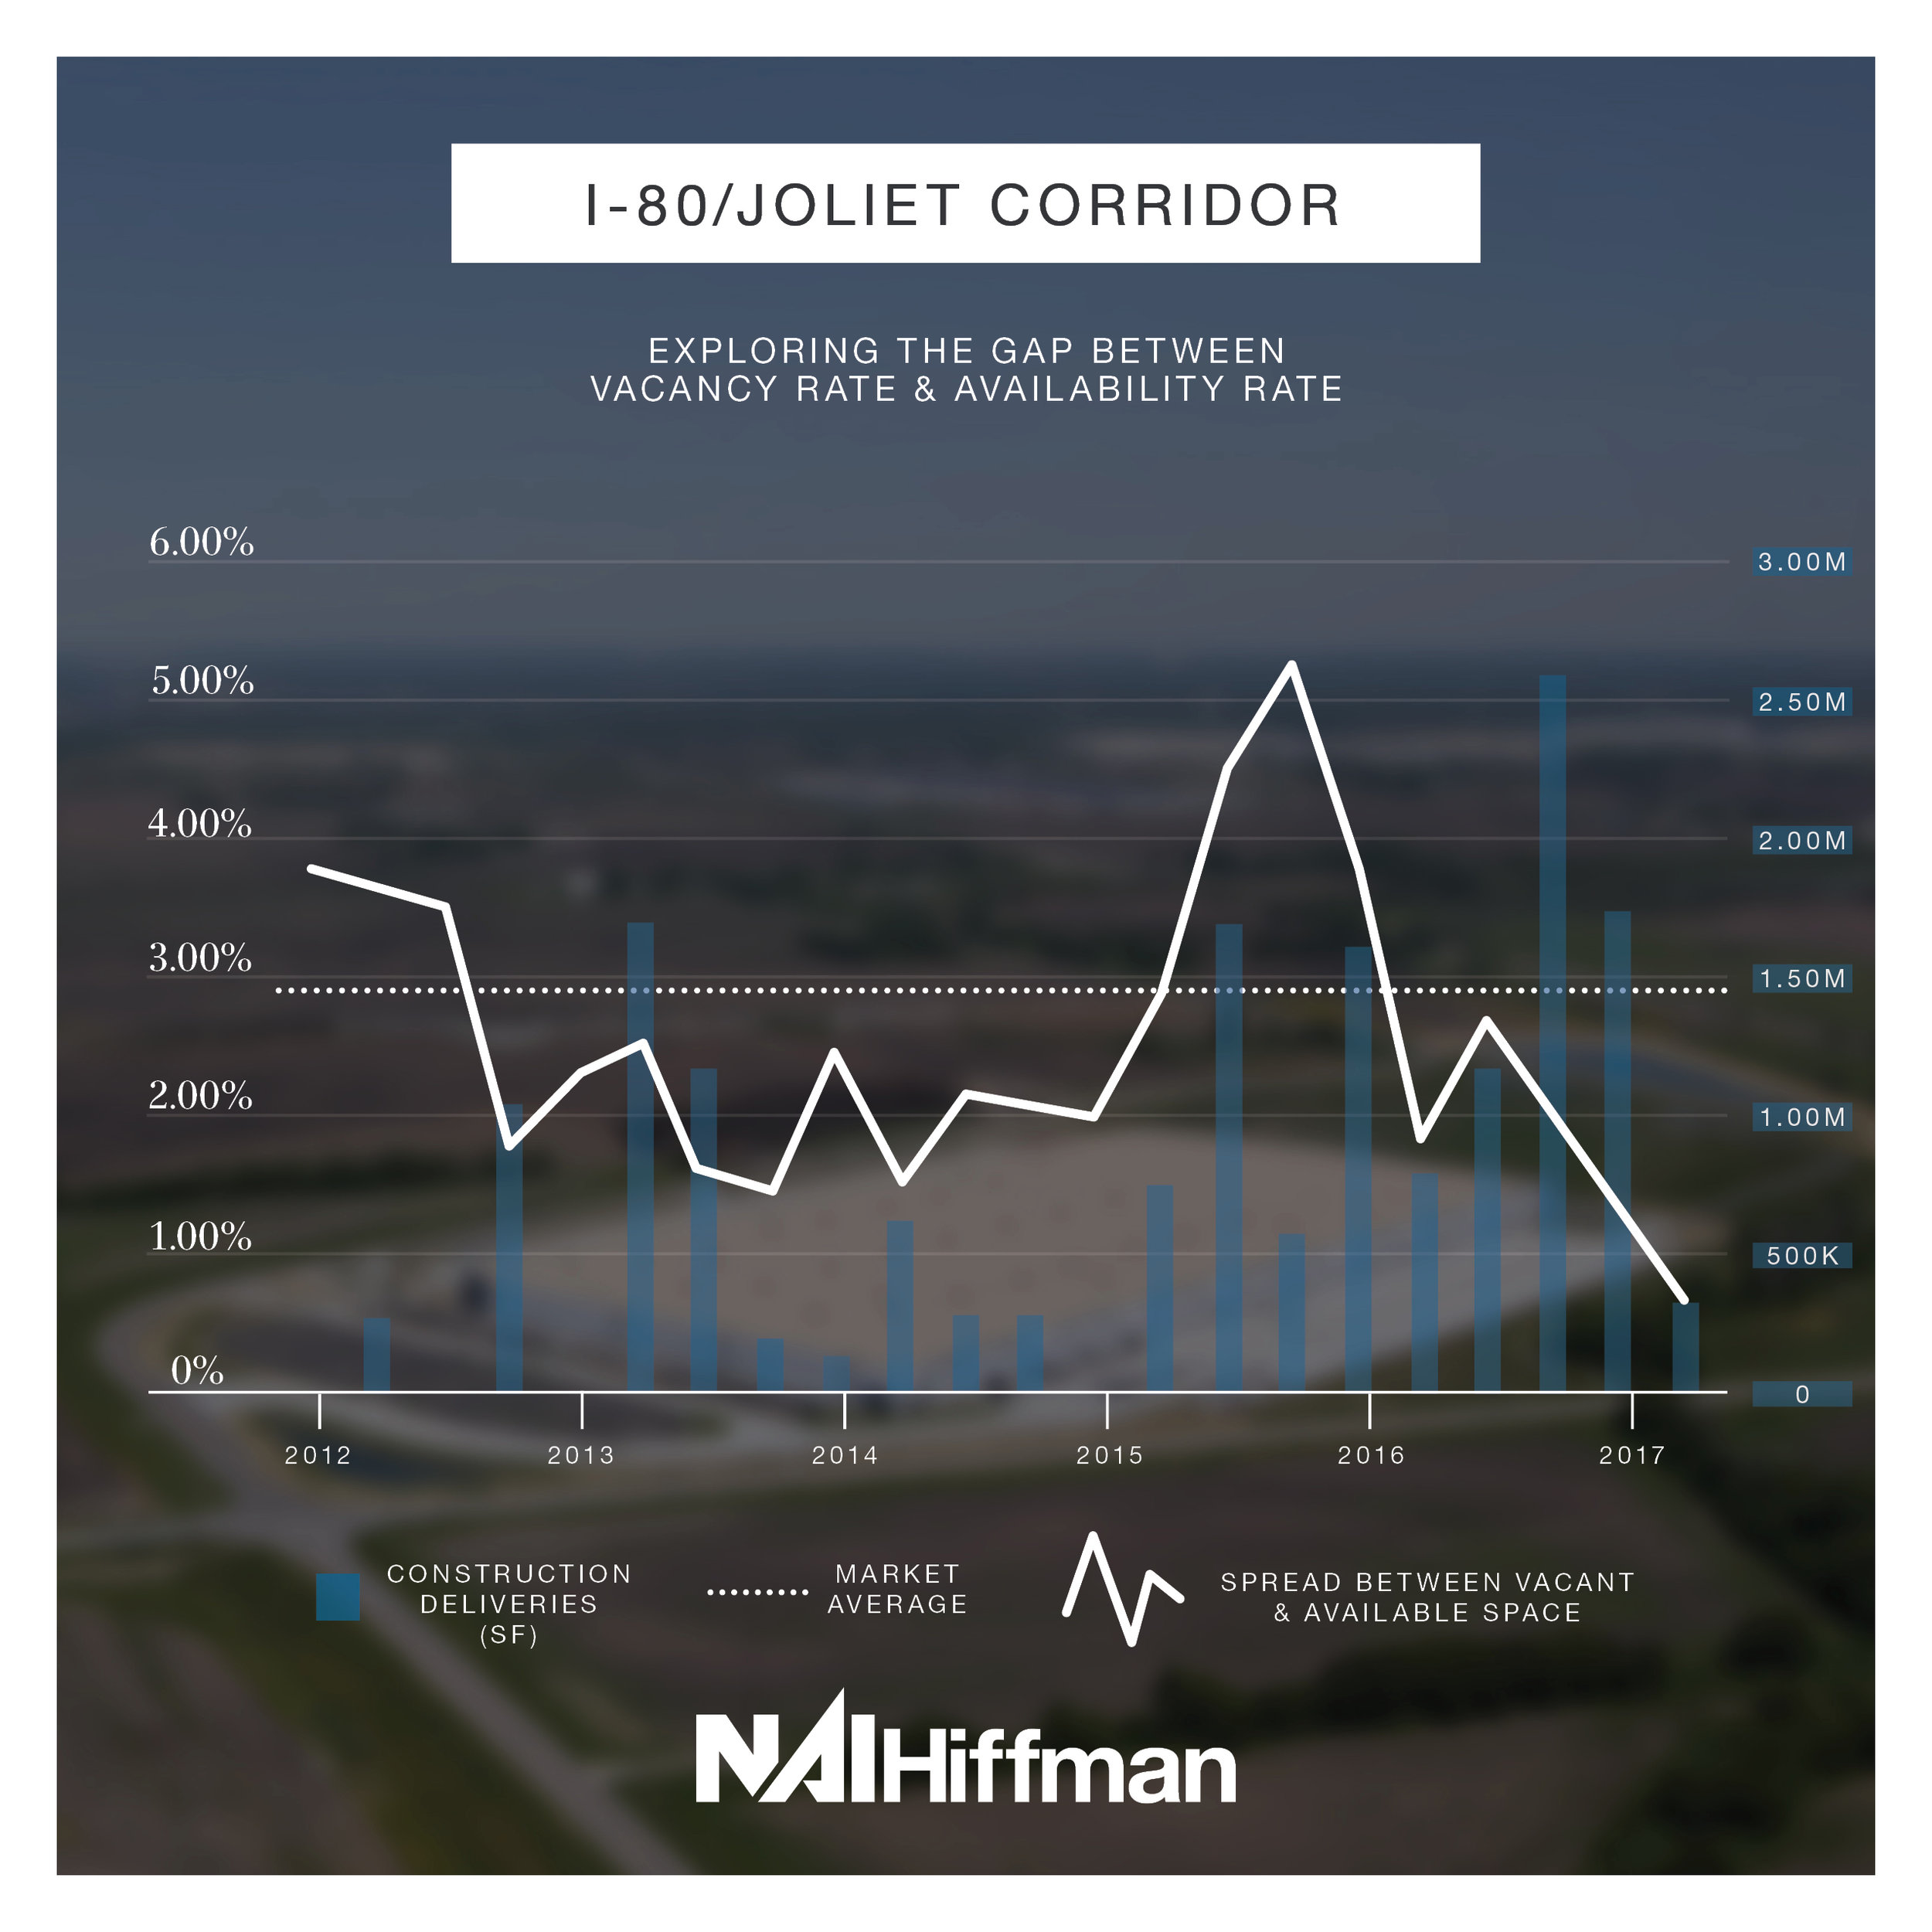   I-80/Joliet Corridor  – Construction deliveries picked up in the I-80/Joliet corridor at the beginning of 2015 and, since then, the demand has drastically outpaced supply with strong leasing activity for the past 6 quarters.  